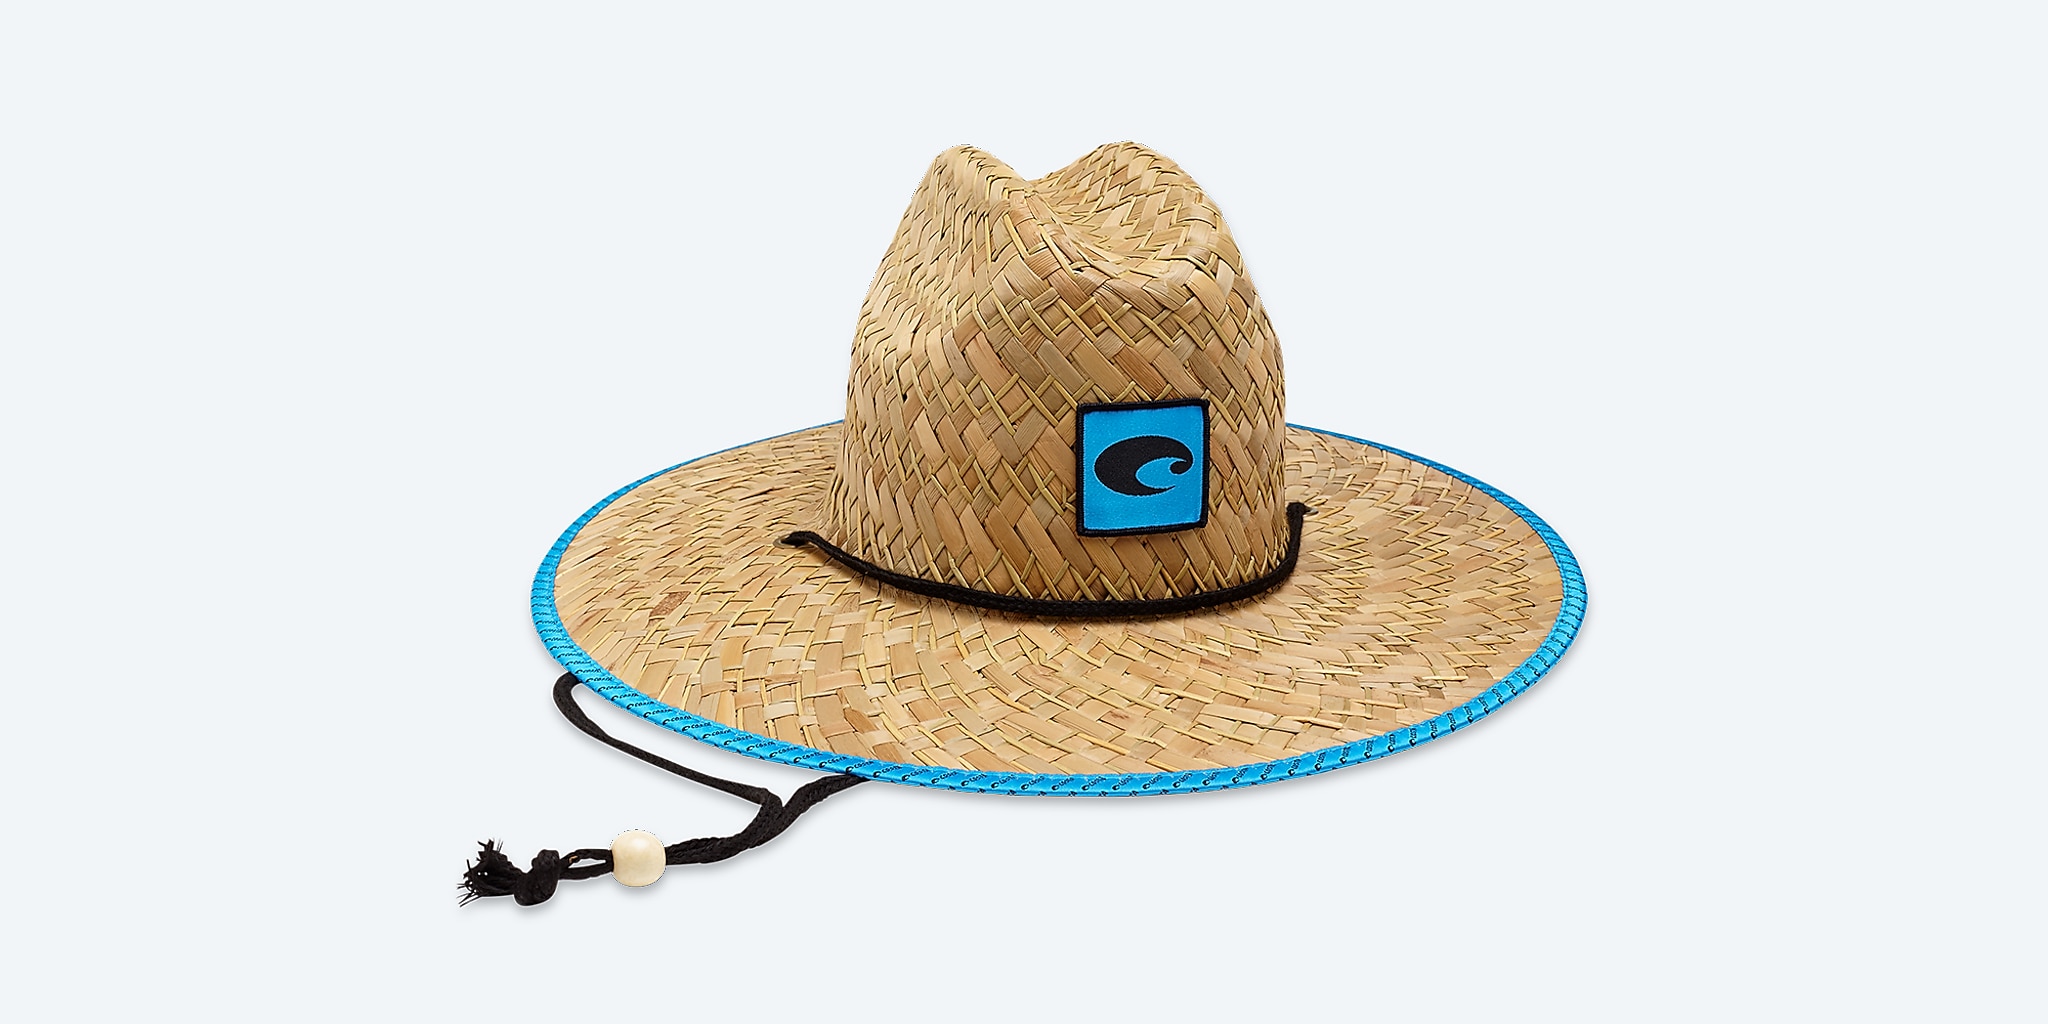 Costa Straw Hat - Straw/Natural, one size (OS)